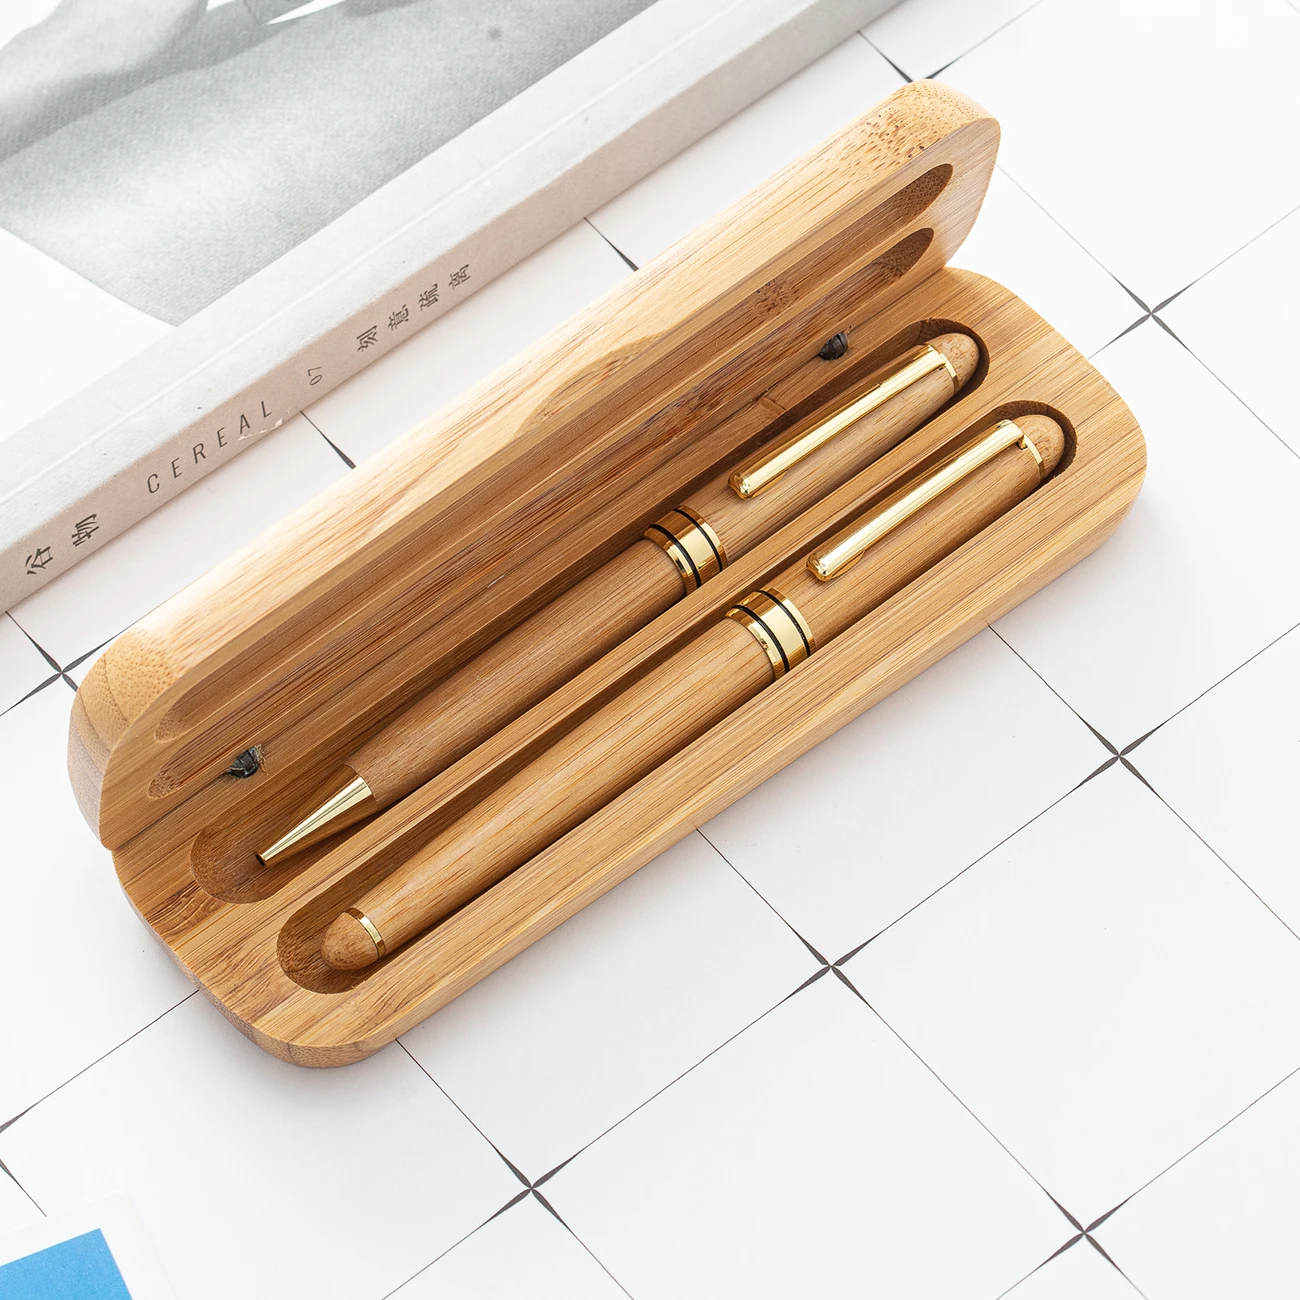 Promotional stationery wooden pen gift set with custom logo engraved luxury gift bamboo ball pen with bamboo case box